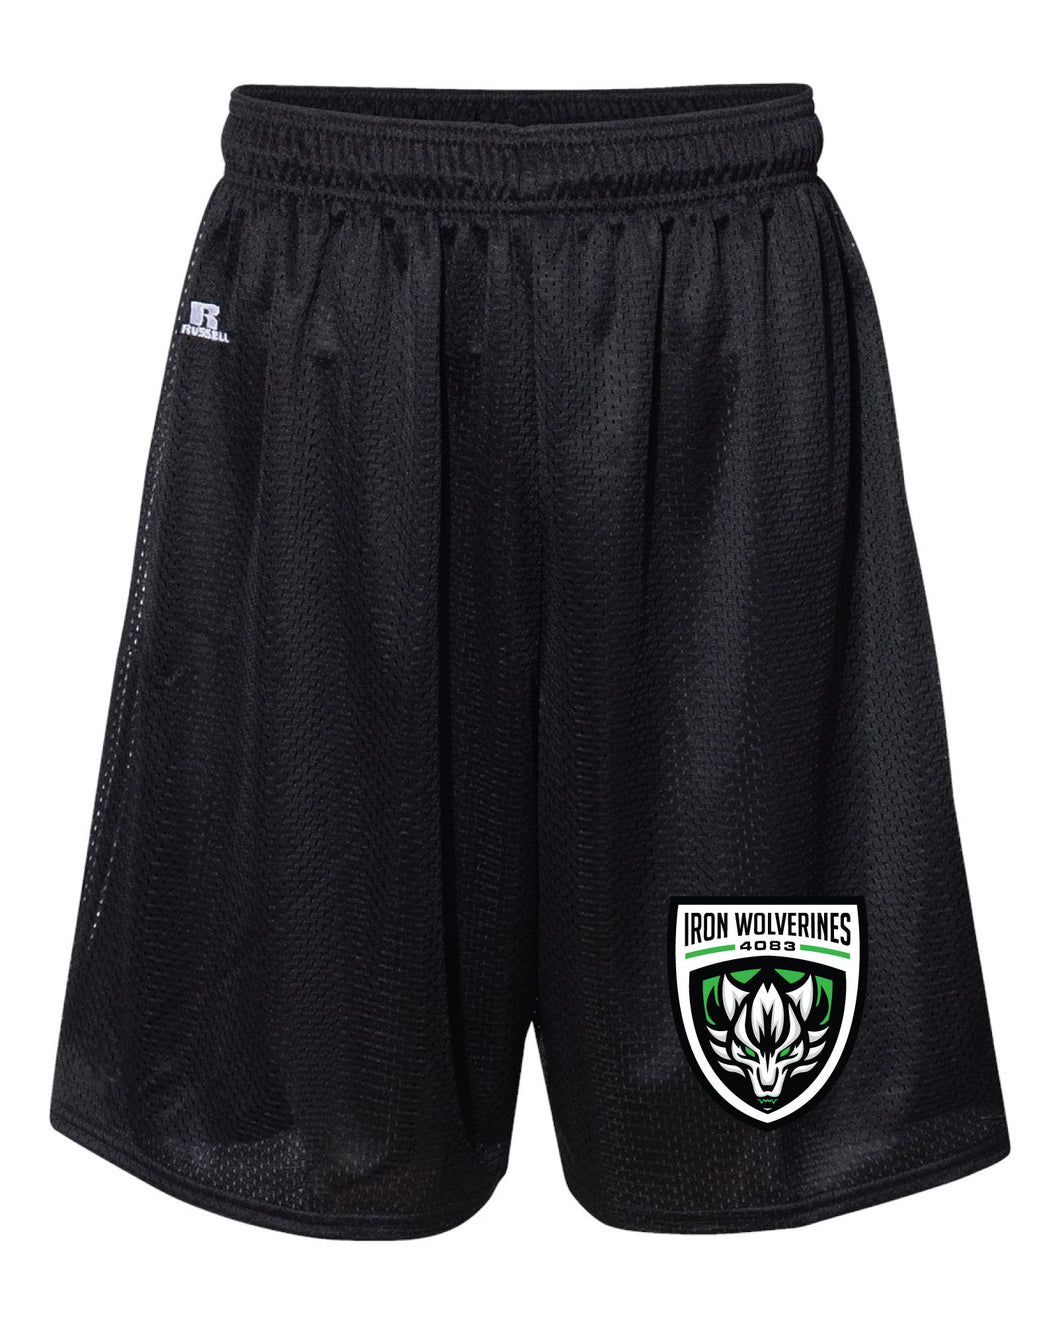 Iron Wolverines Russell Athletic Tech Shorts - Black - 5KounT2018